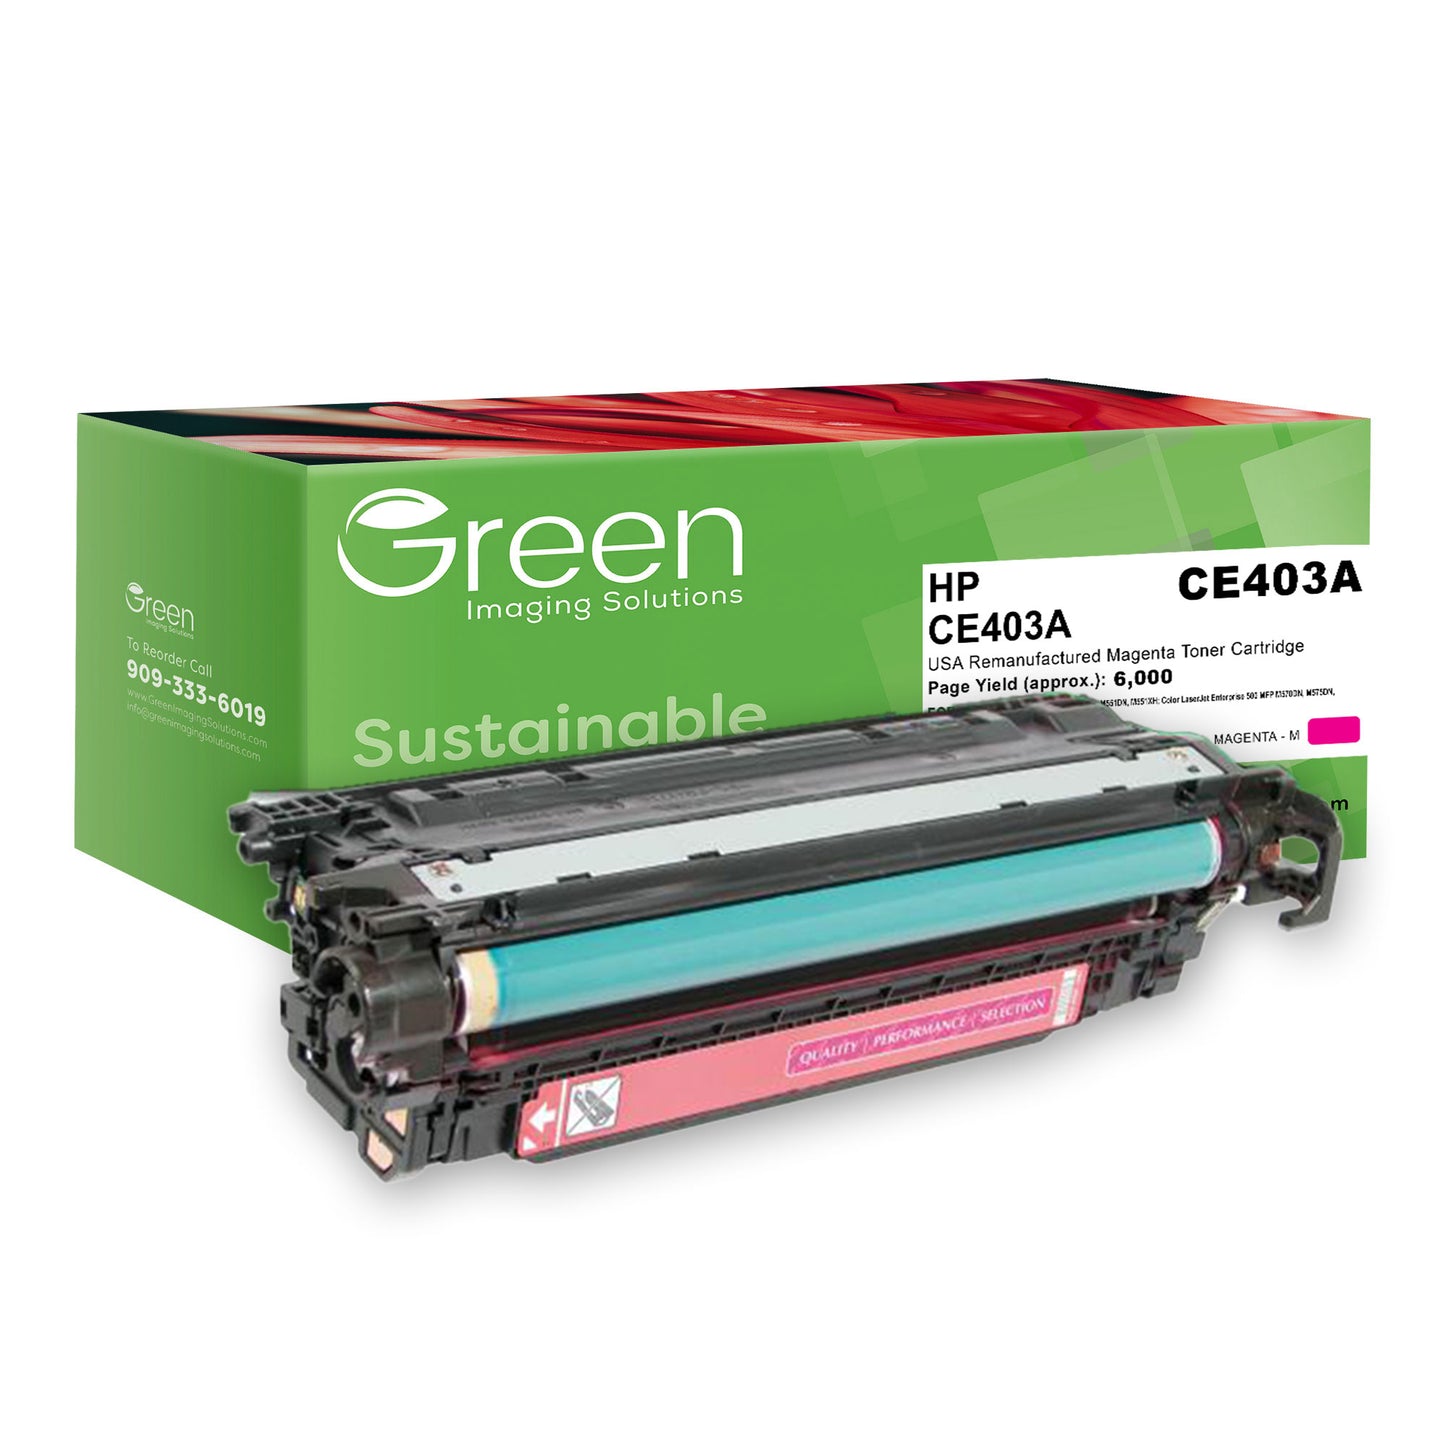 GIS USA Remanufactured Magenta Toner Cartridge for HP CE403A (HP 507A)